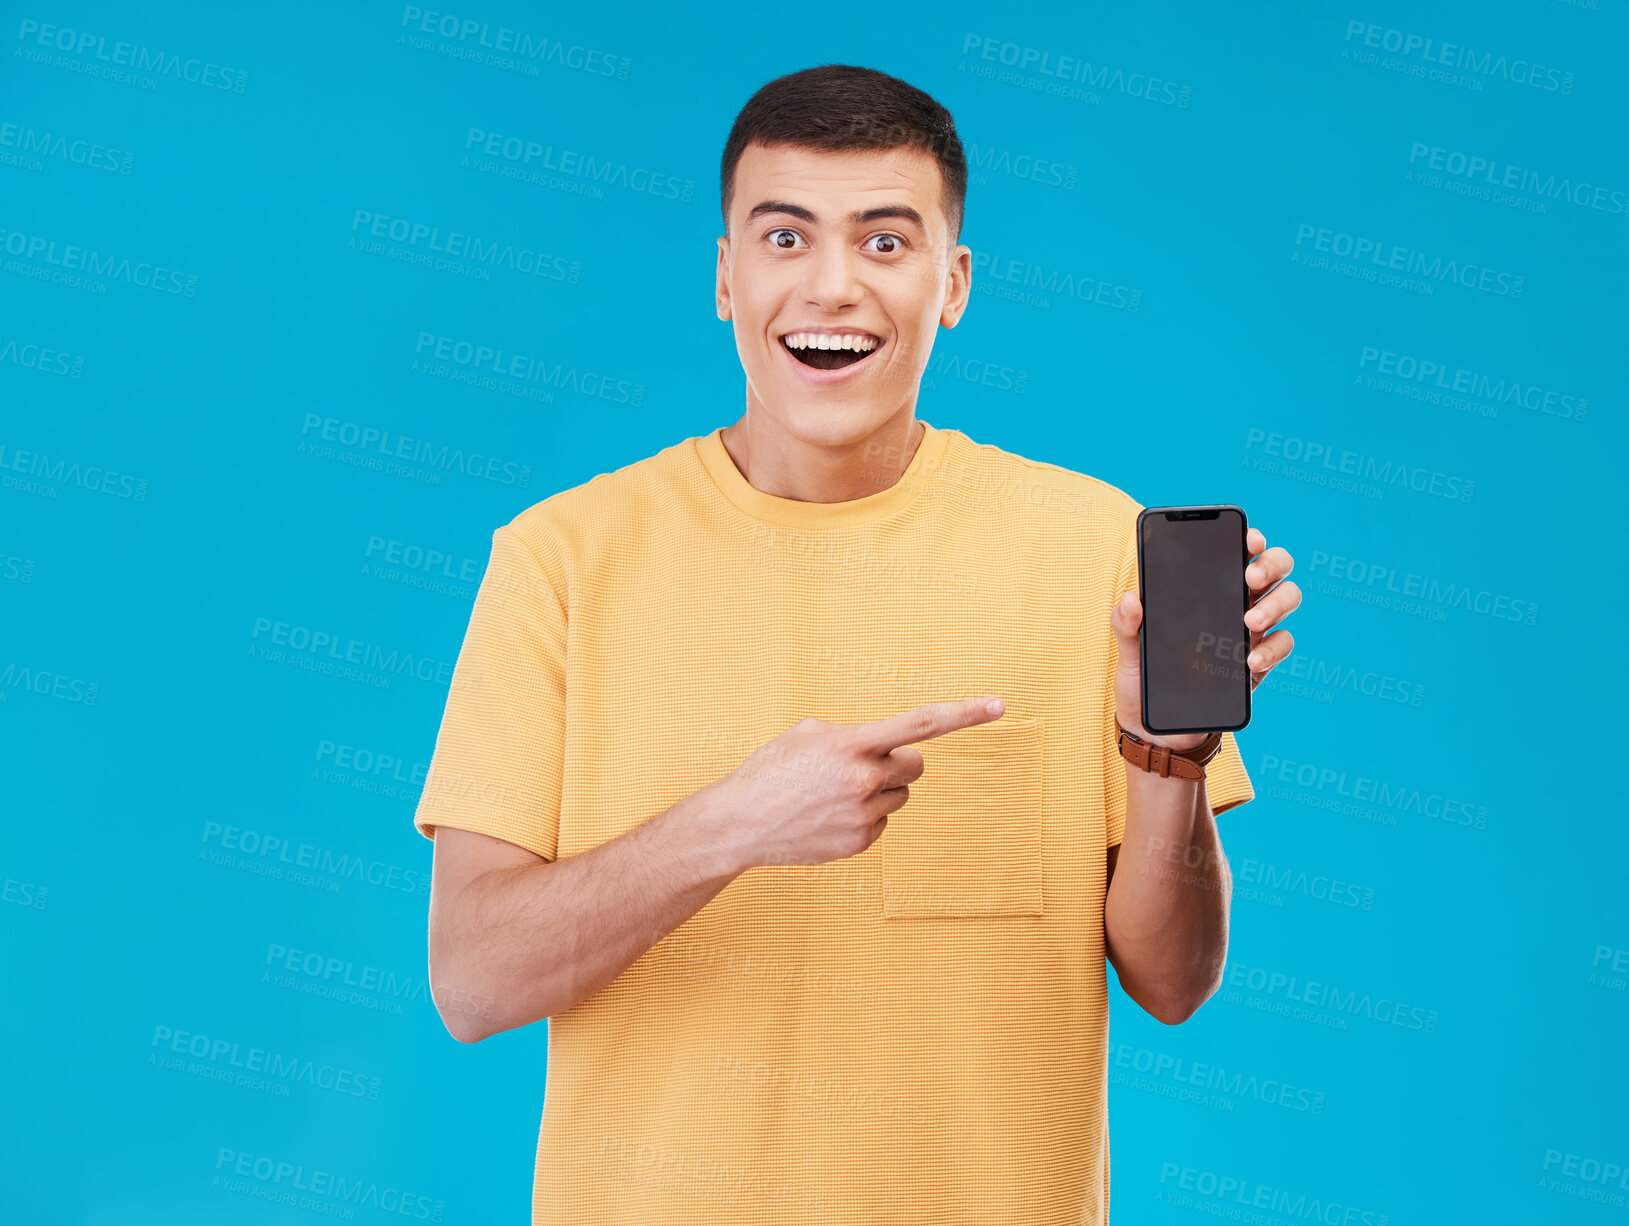 Buy stock photo Portrait, phone and pointing with an excited man on a blue background in studio for social media marketing. Contact, notification or alert with a happy young person showing a mobile screen or display